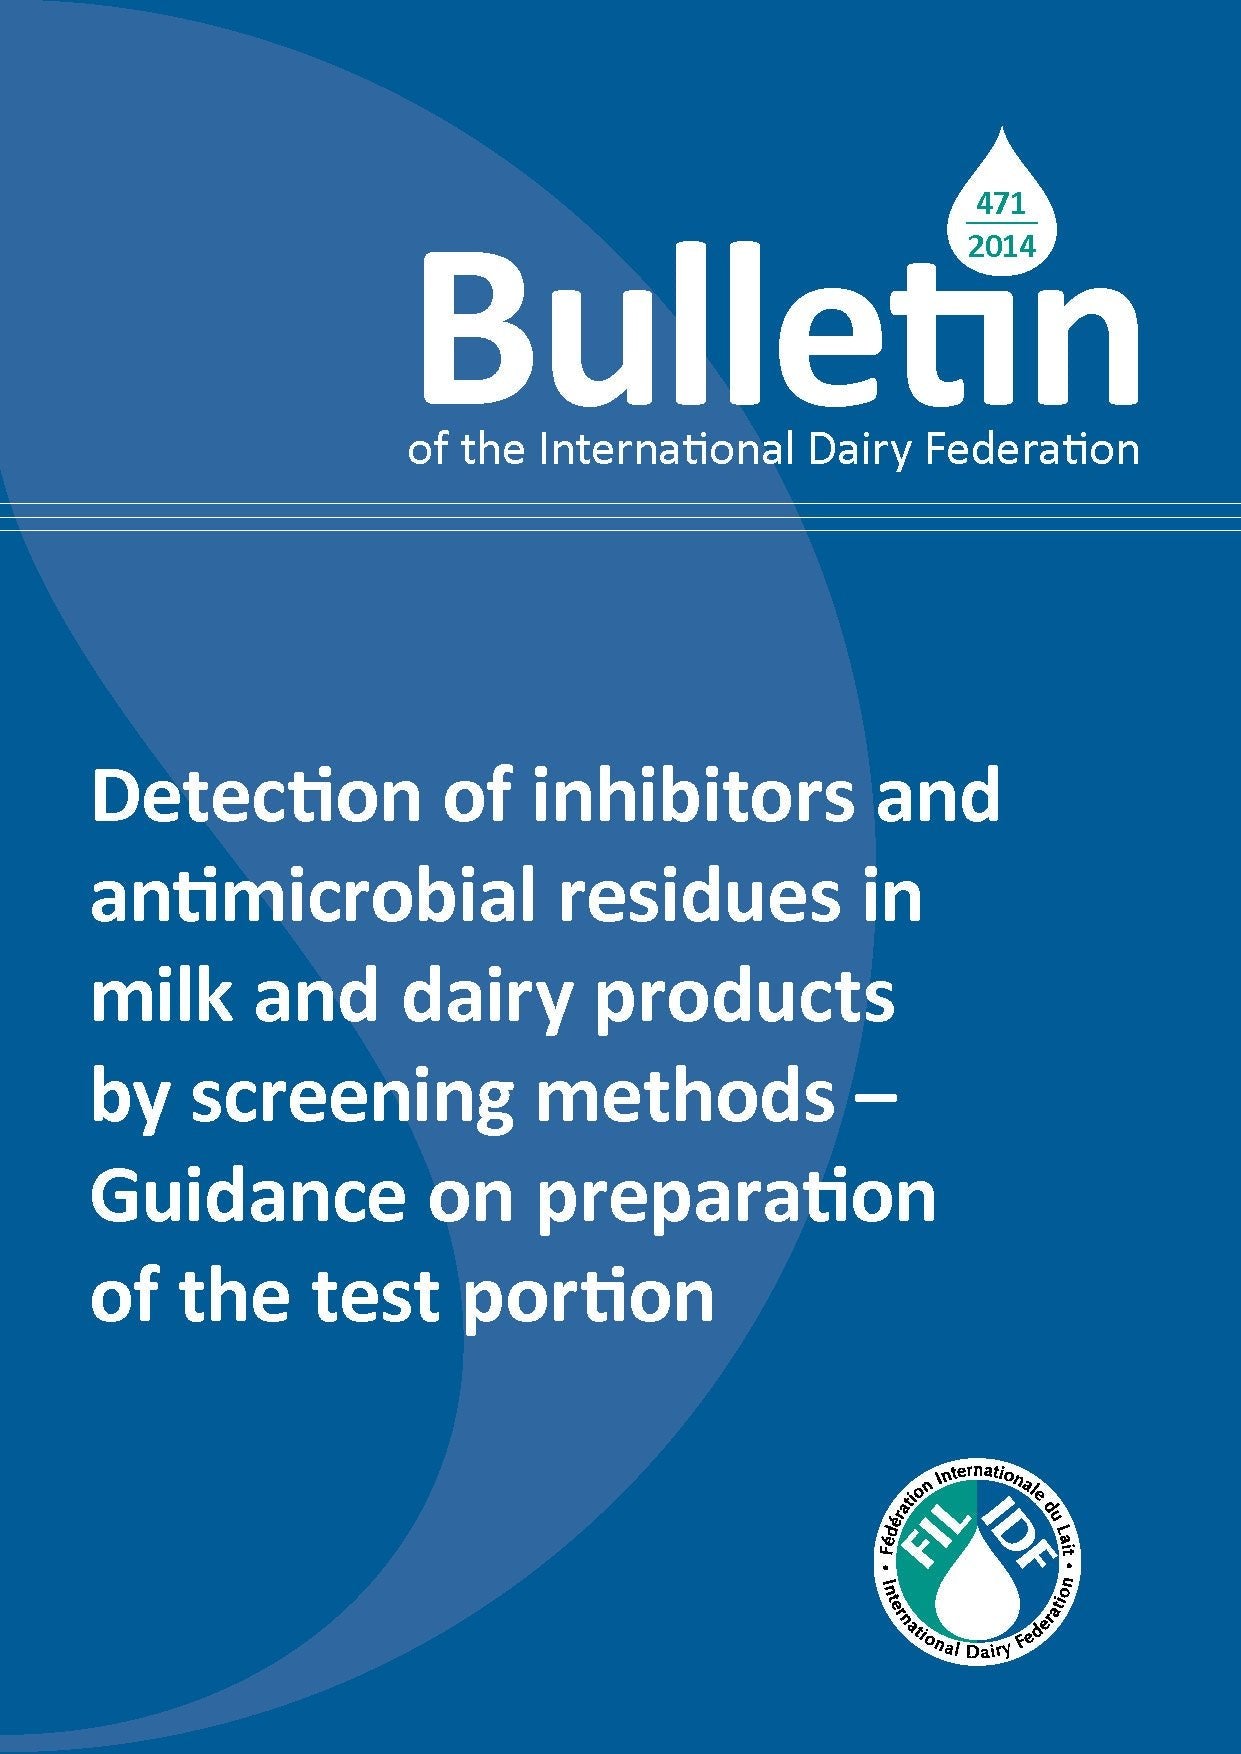 Bulletin of the IDF N° 471/2014: Detection of inhibitors and antimicrobial residues in milk and dairy products by screening methods - Guidance on preparation of the test portion - FIL-IDF